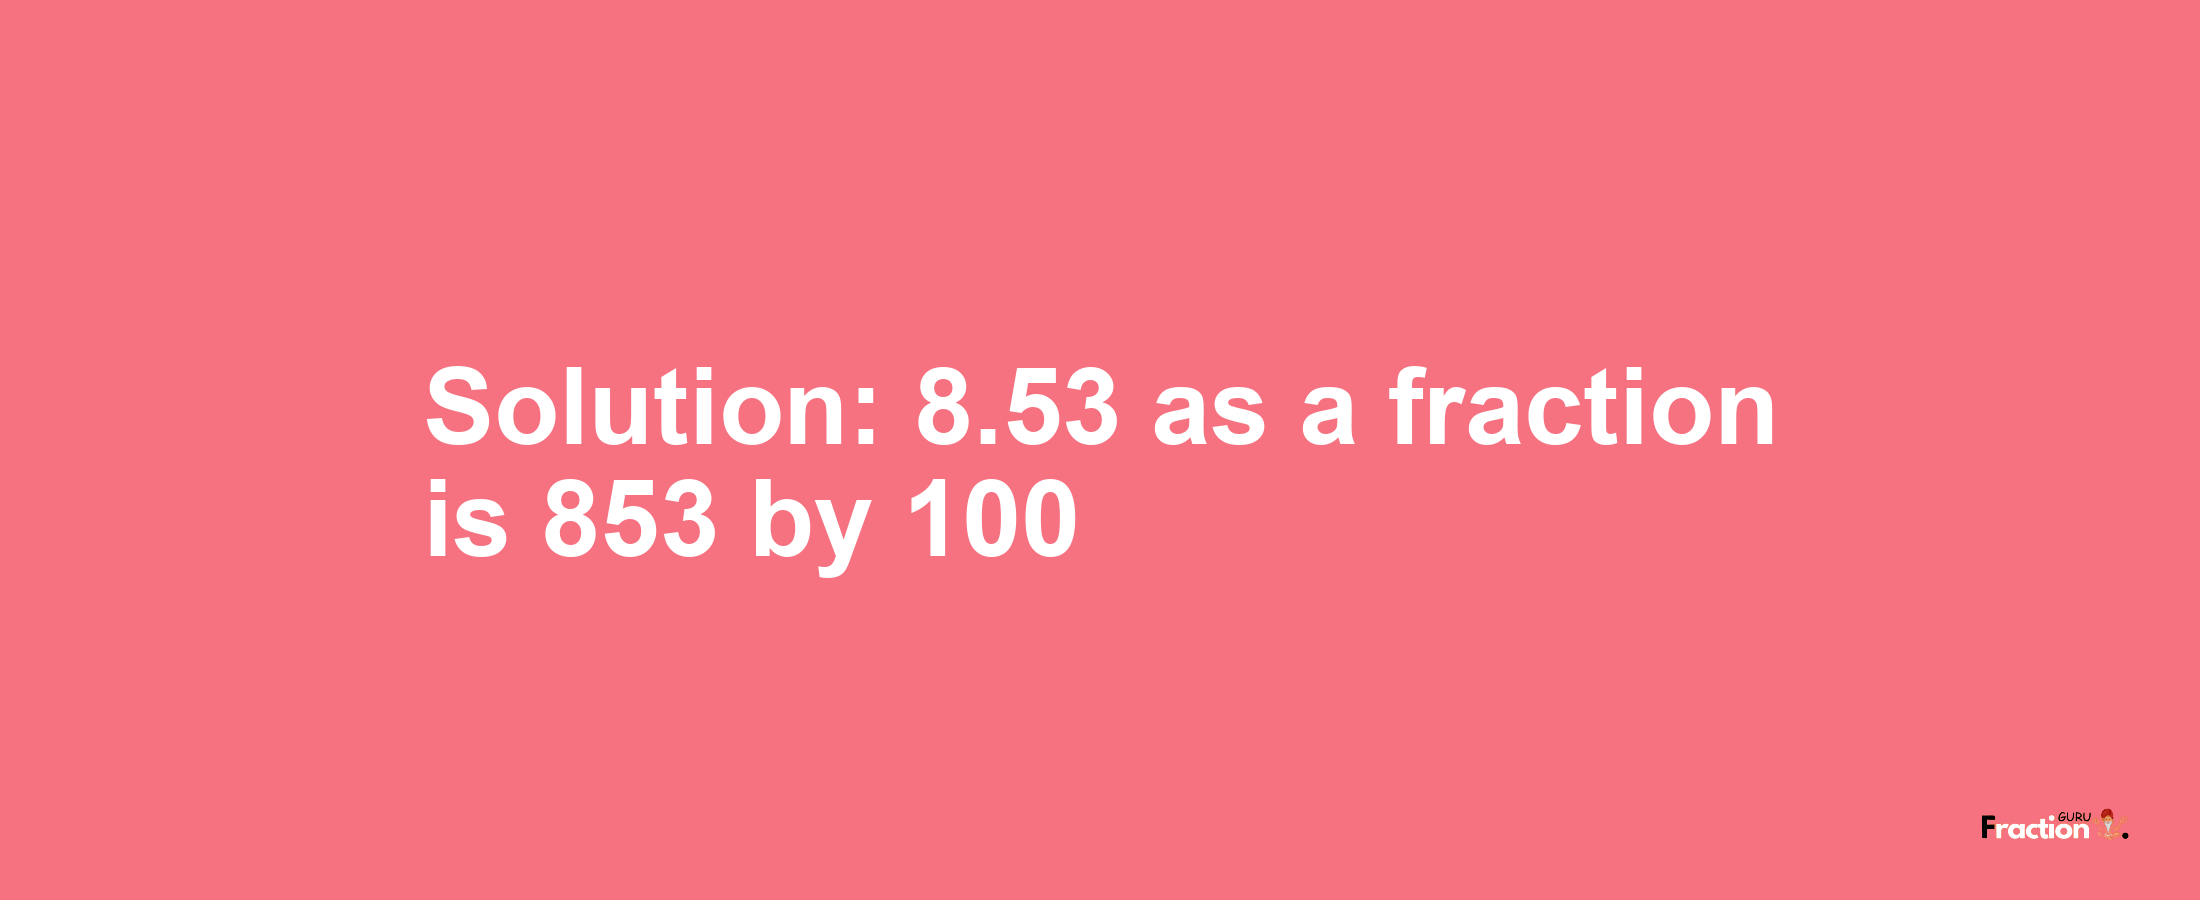 Solution:8.53 as a fraction is 853/100